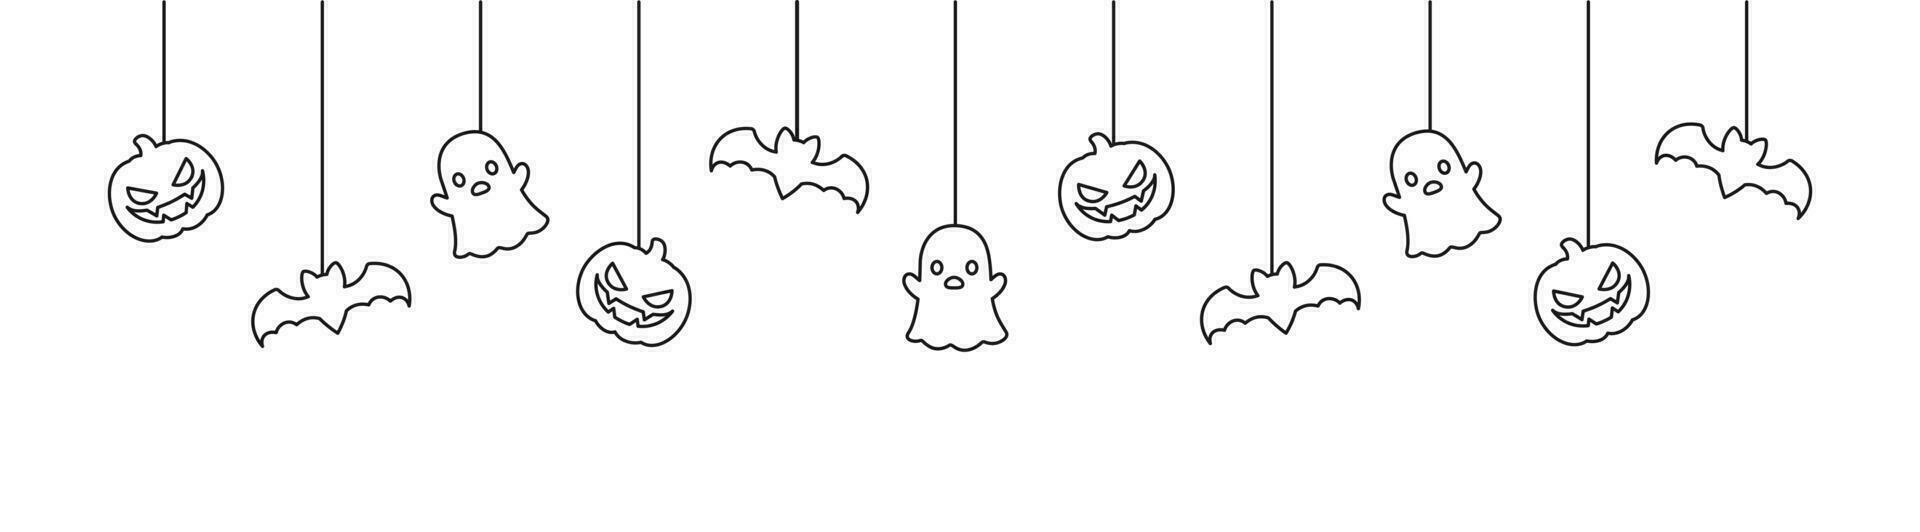 Happy Halloween banner or border with bats, ghost and jack o lantern pumpkins outline doodle. Hanging Spooky Ornaments Decoration Vector illustration, trick or treat party invitation